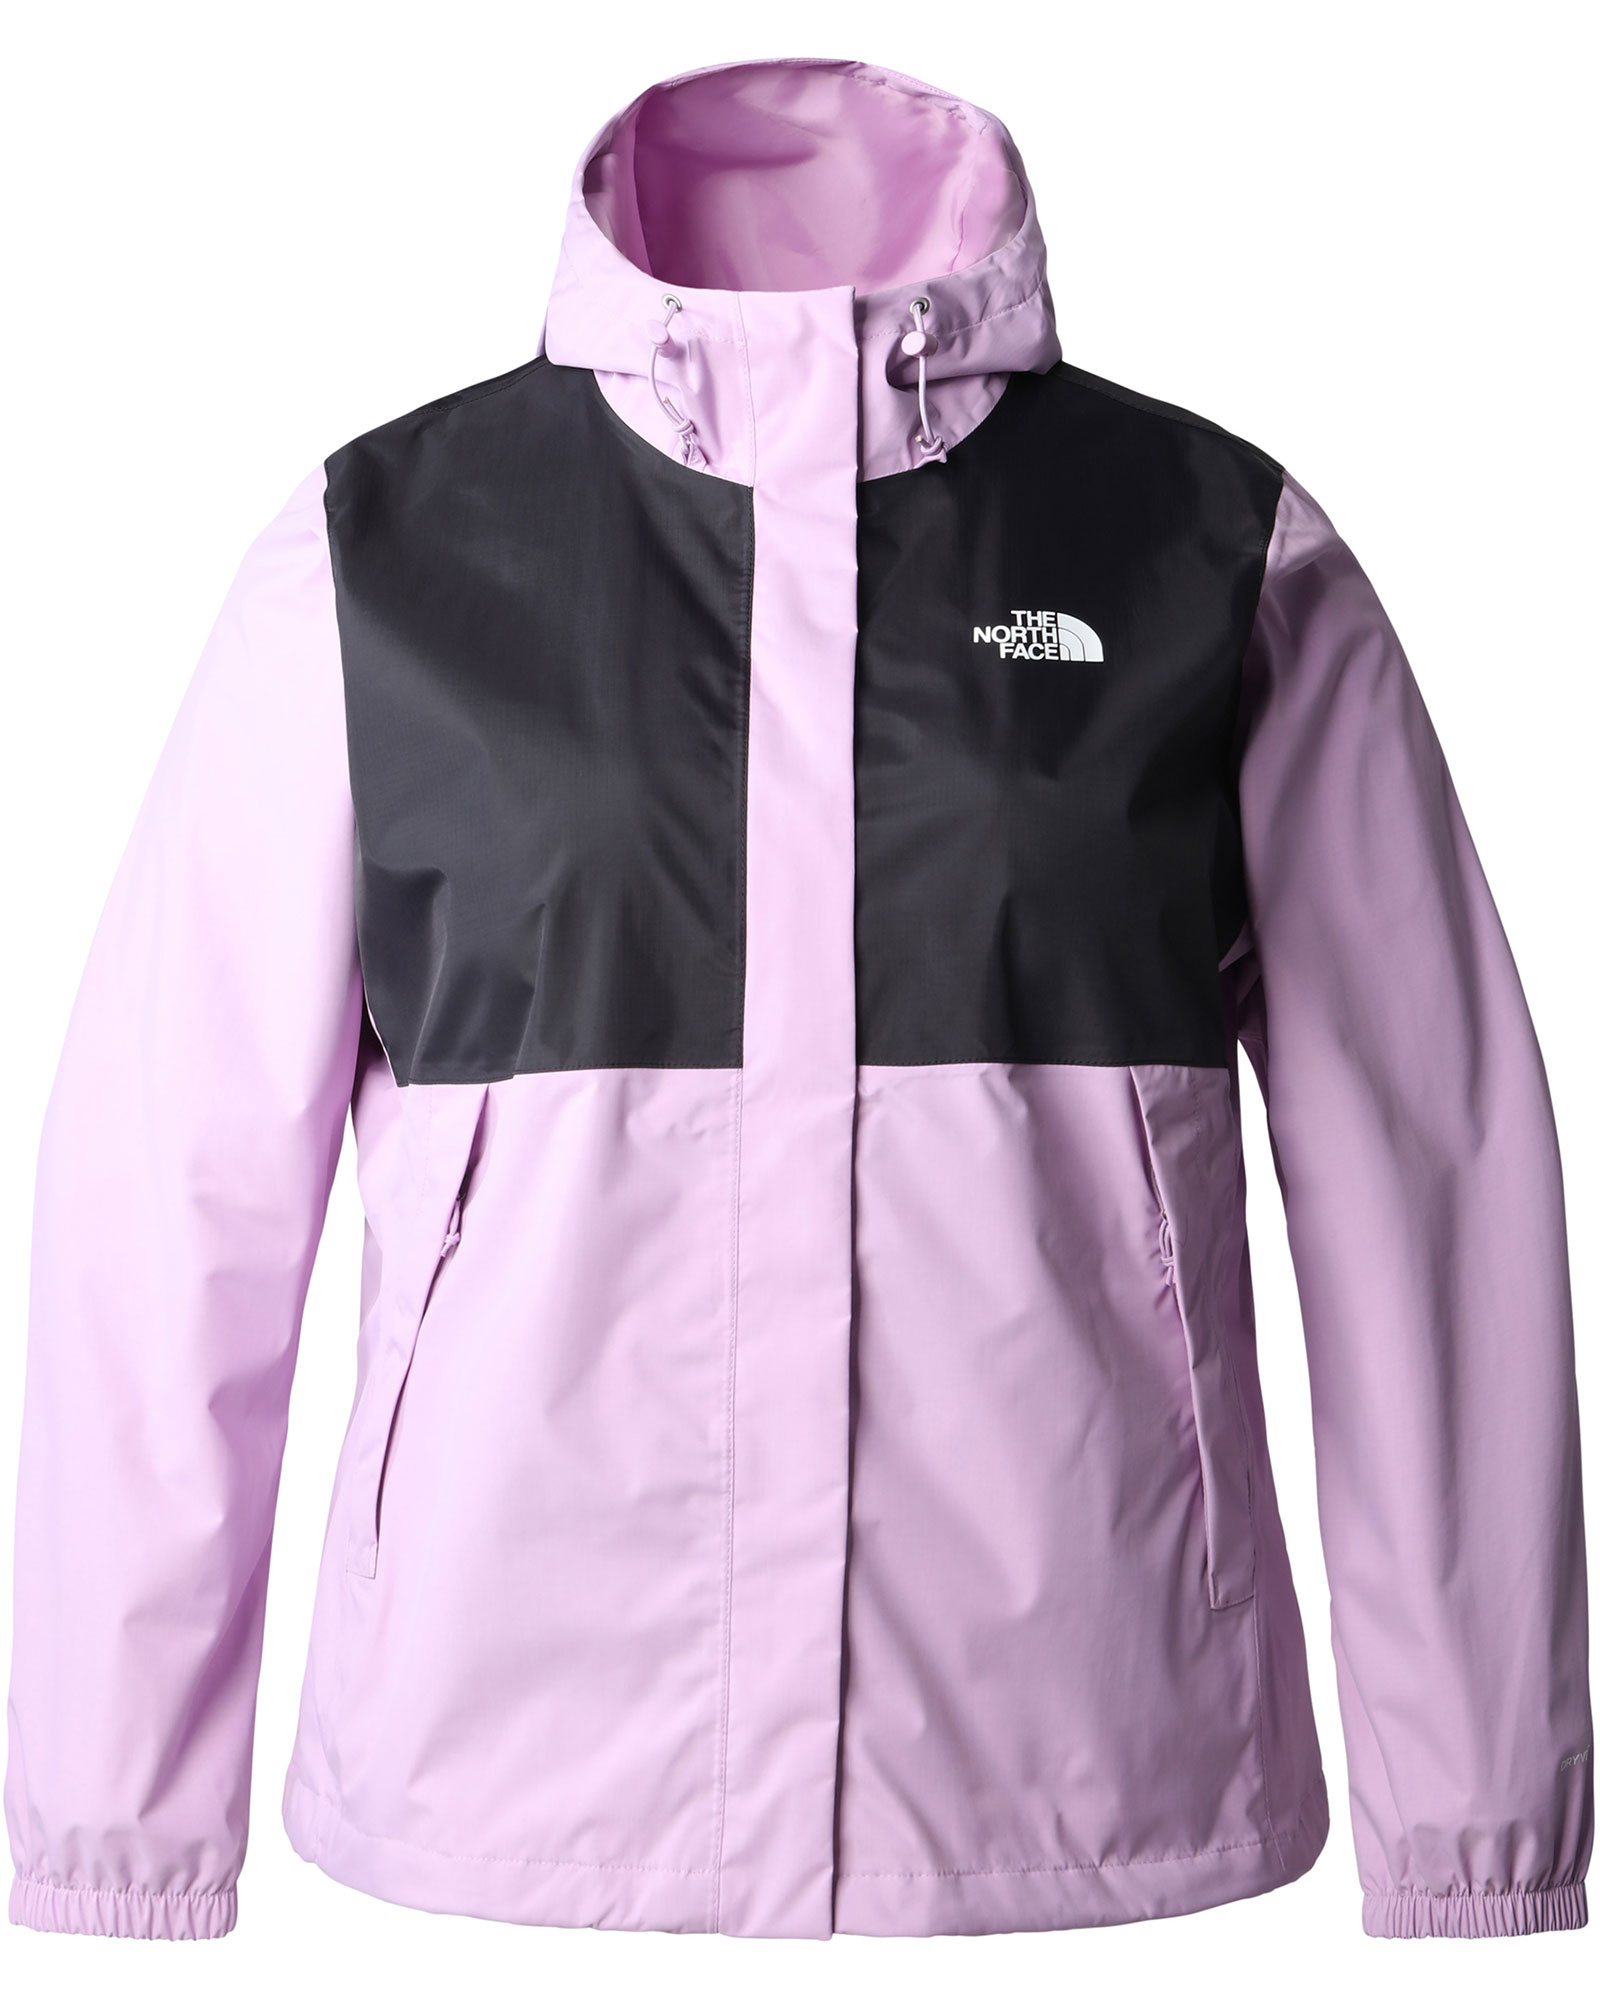 The North Face Womens Antora Jacket Plus